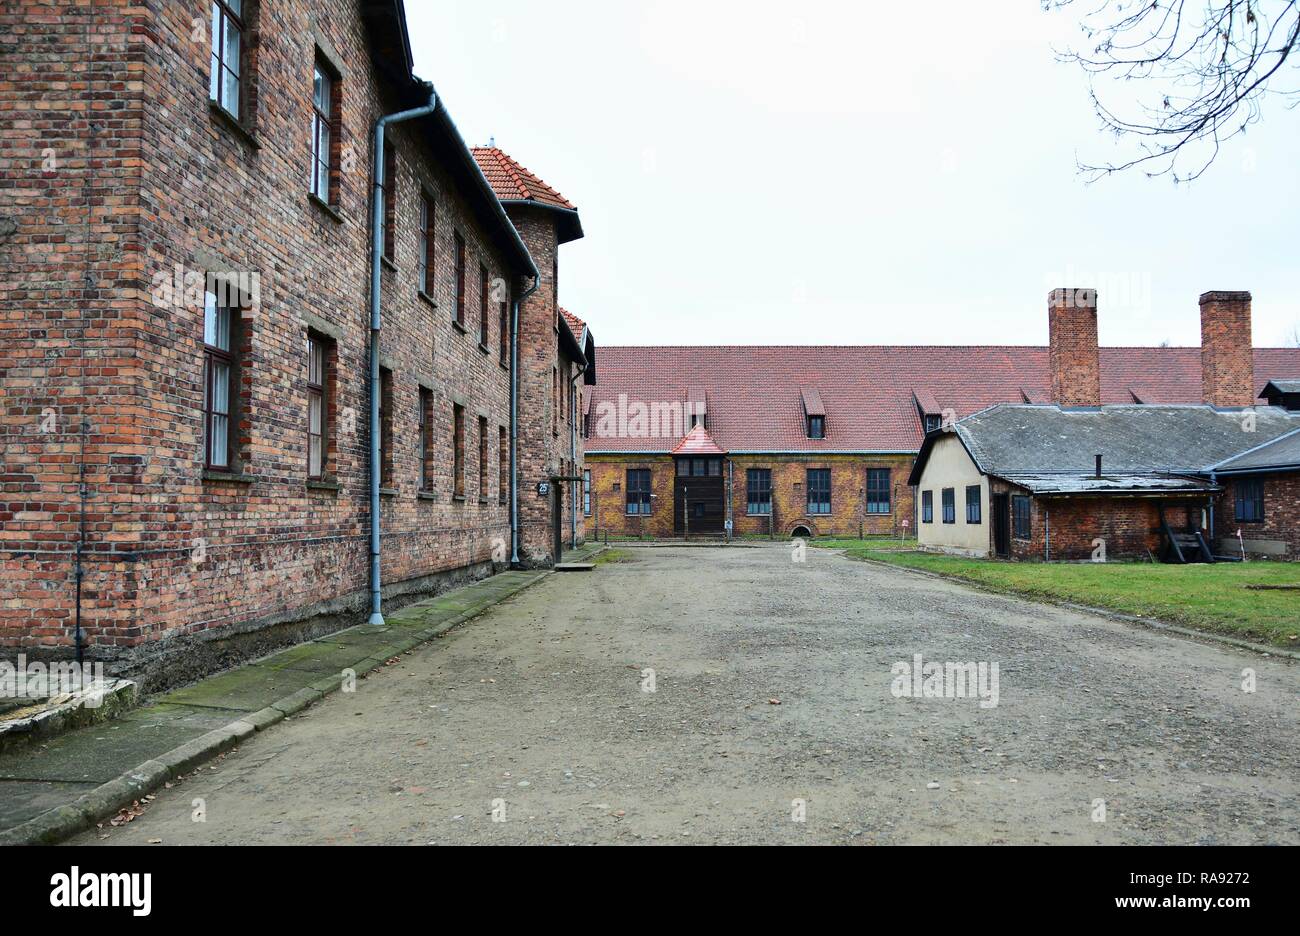 OSWIECIM, POLAND - DECEMBER 07, 2018: Auschwitz I holocaust memorial museum. Auschwitz I is the main camp of nazi concentration and extermination camp Stock Photo